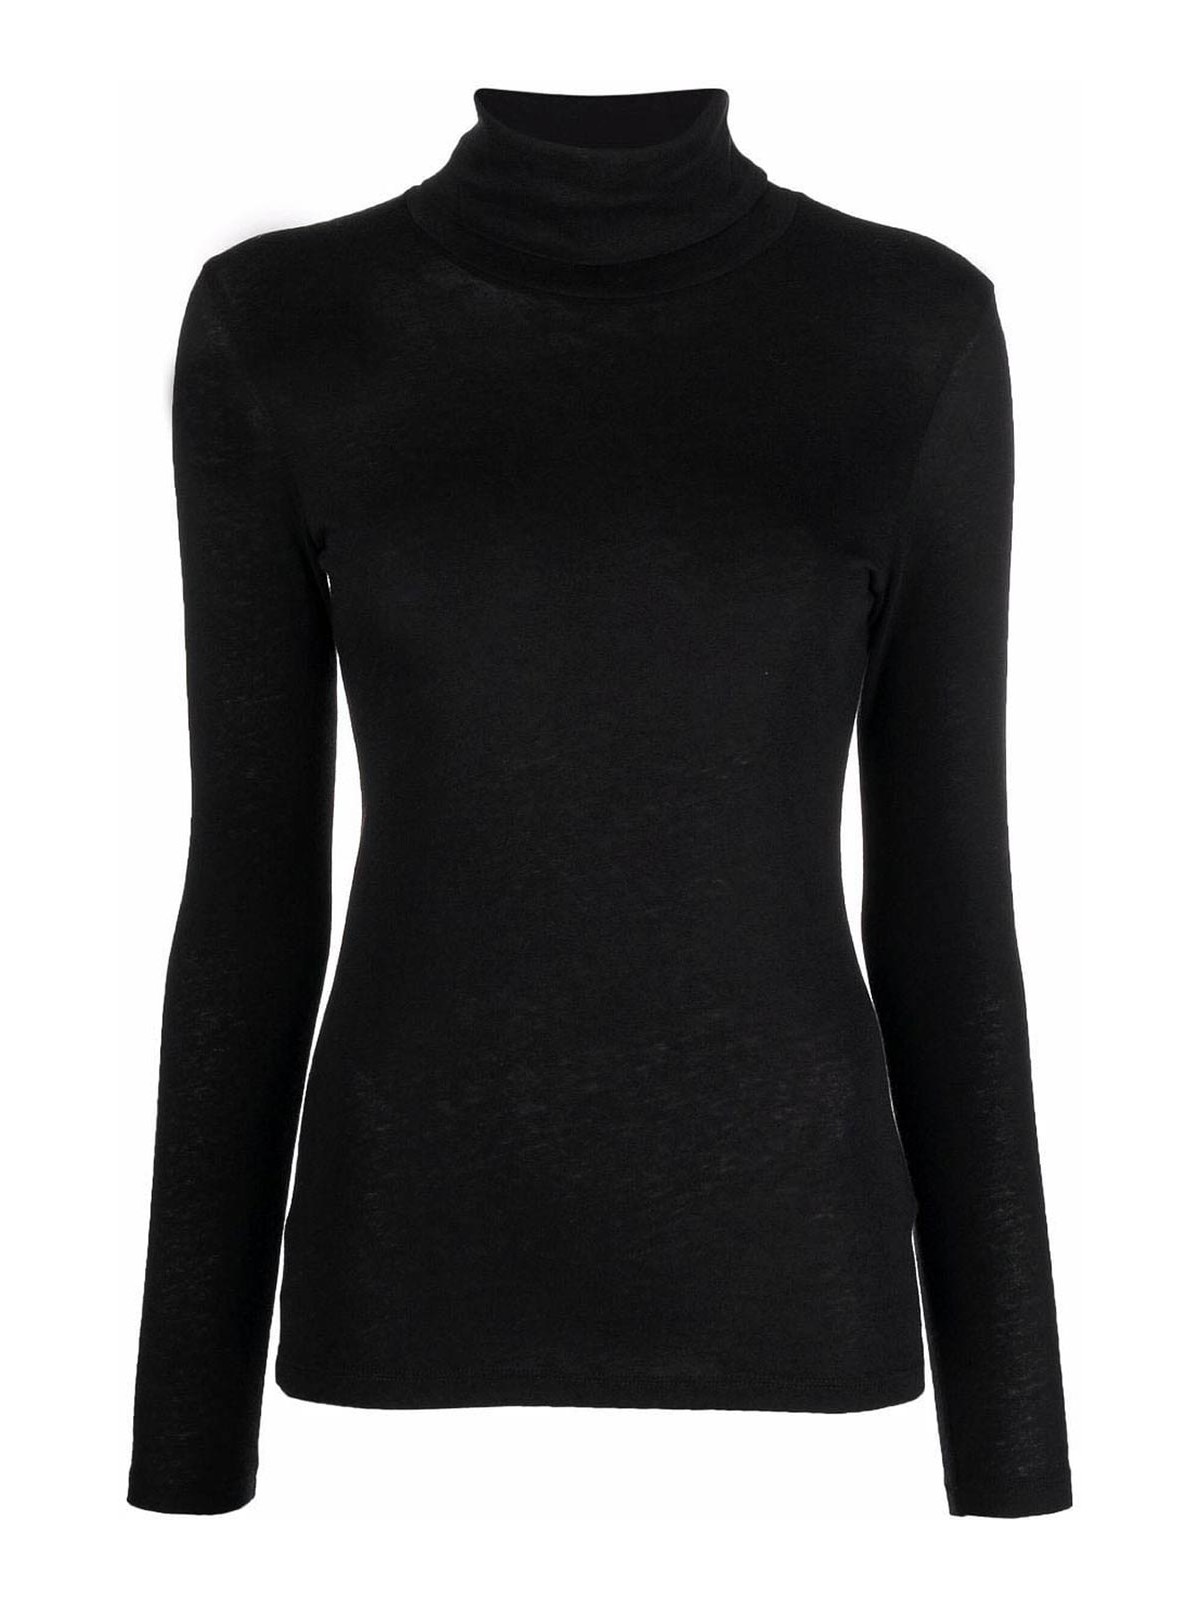 Majestic Cotton And Cashmere Blend Turtleneck Sweater In Black